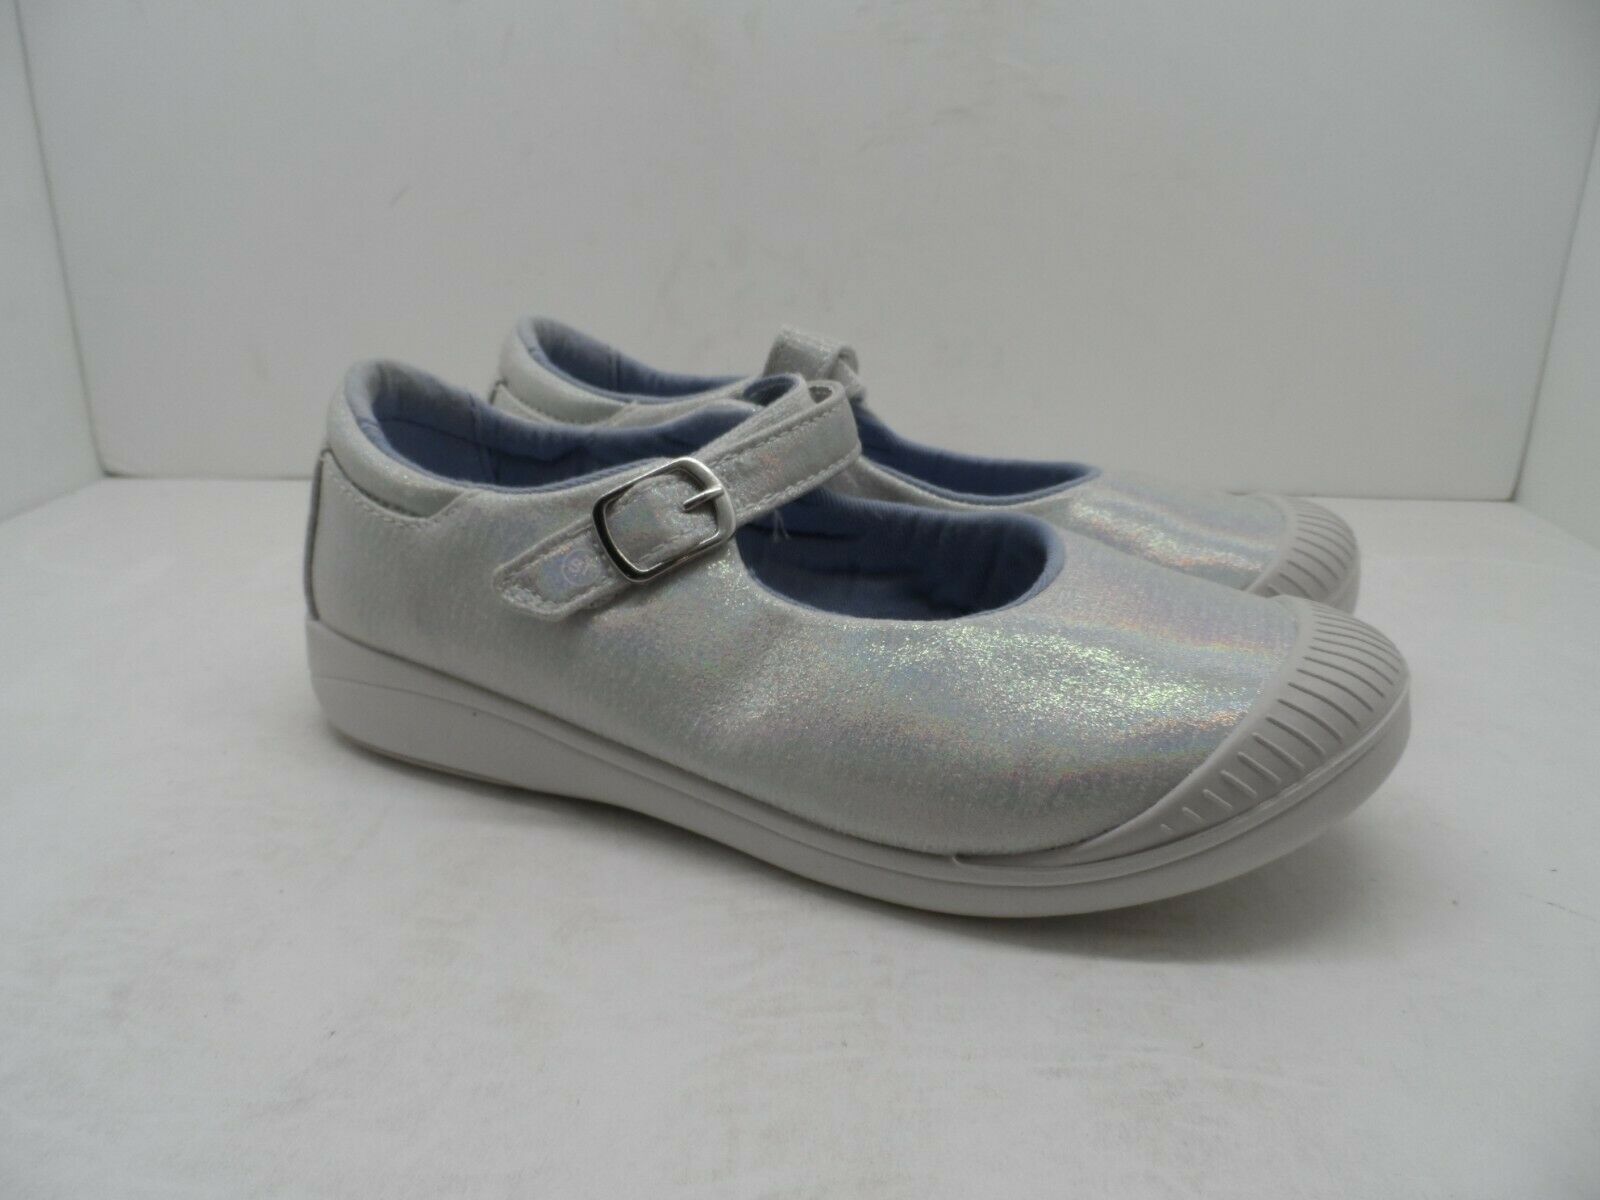 Primary image for Stride Rite Girl's Reagan Mary Jane Casual Shoe Iridescent Size 10M